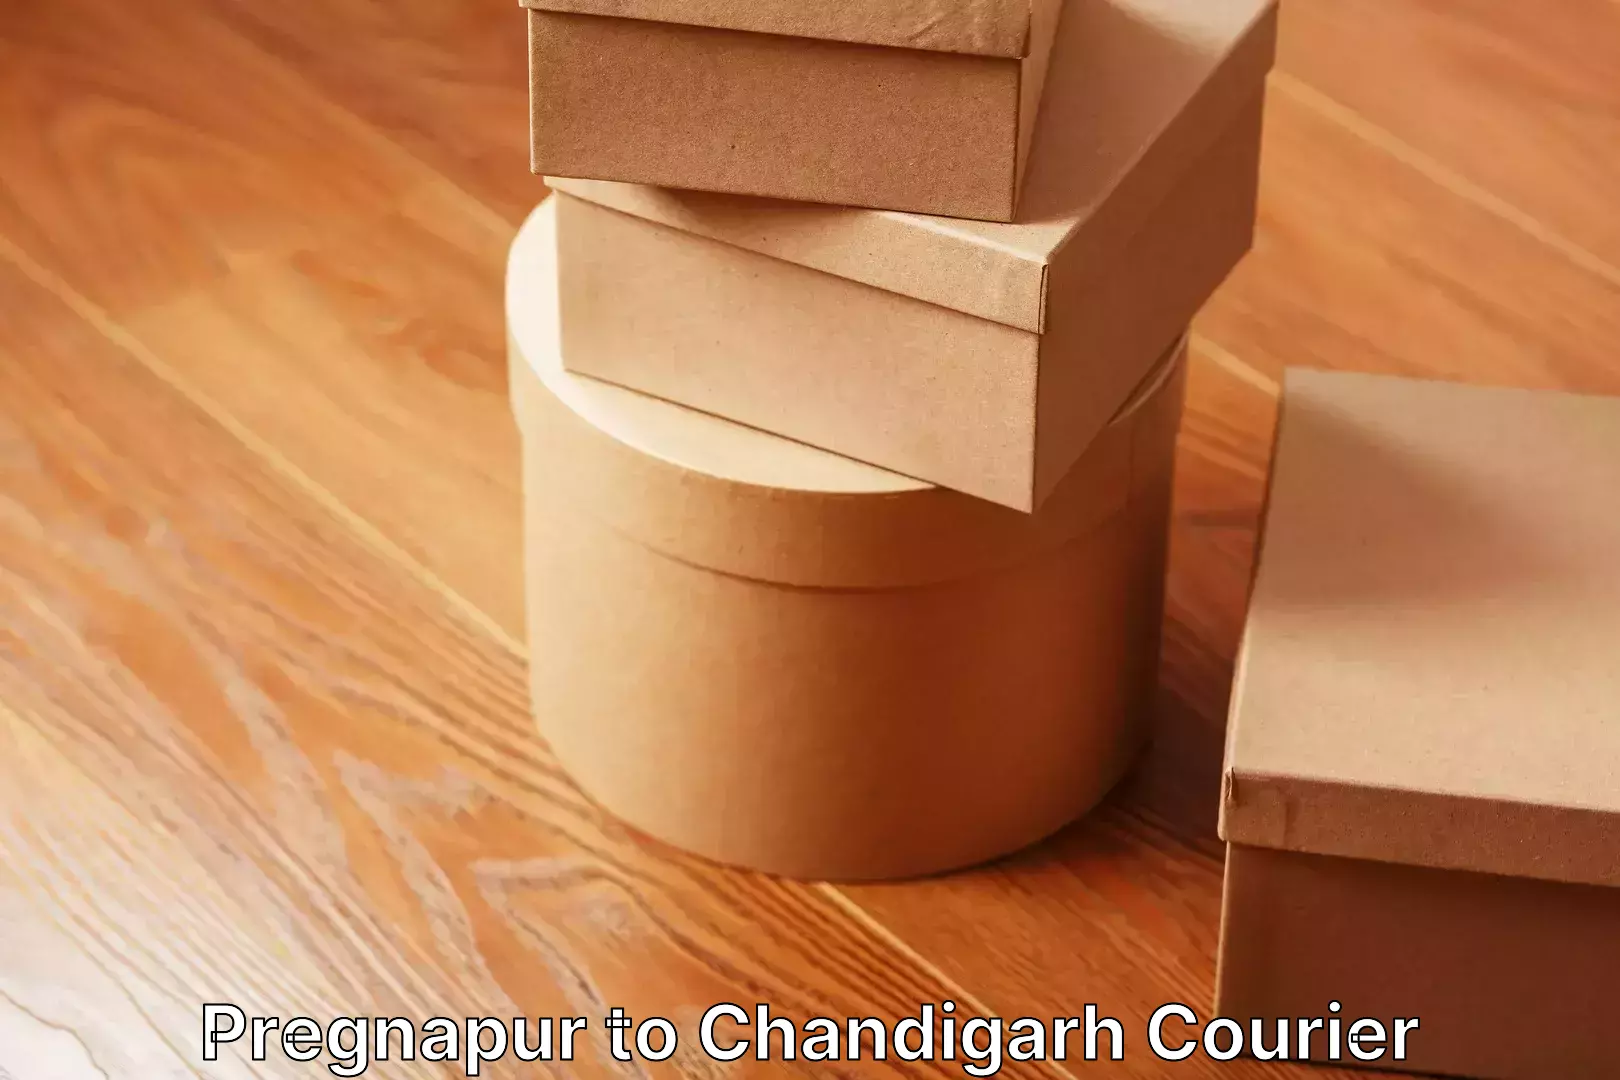 Home goods moving company Pregnapur to Chandigarh